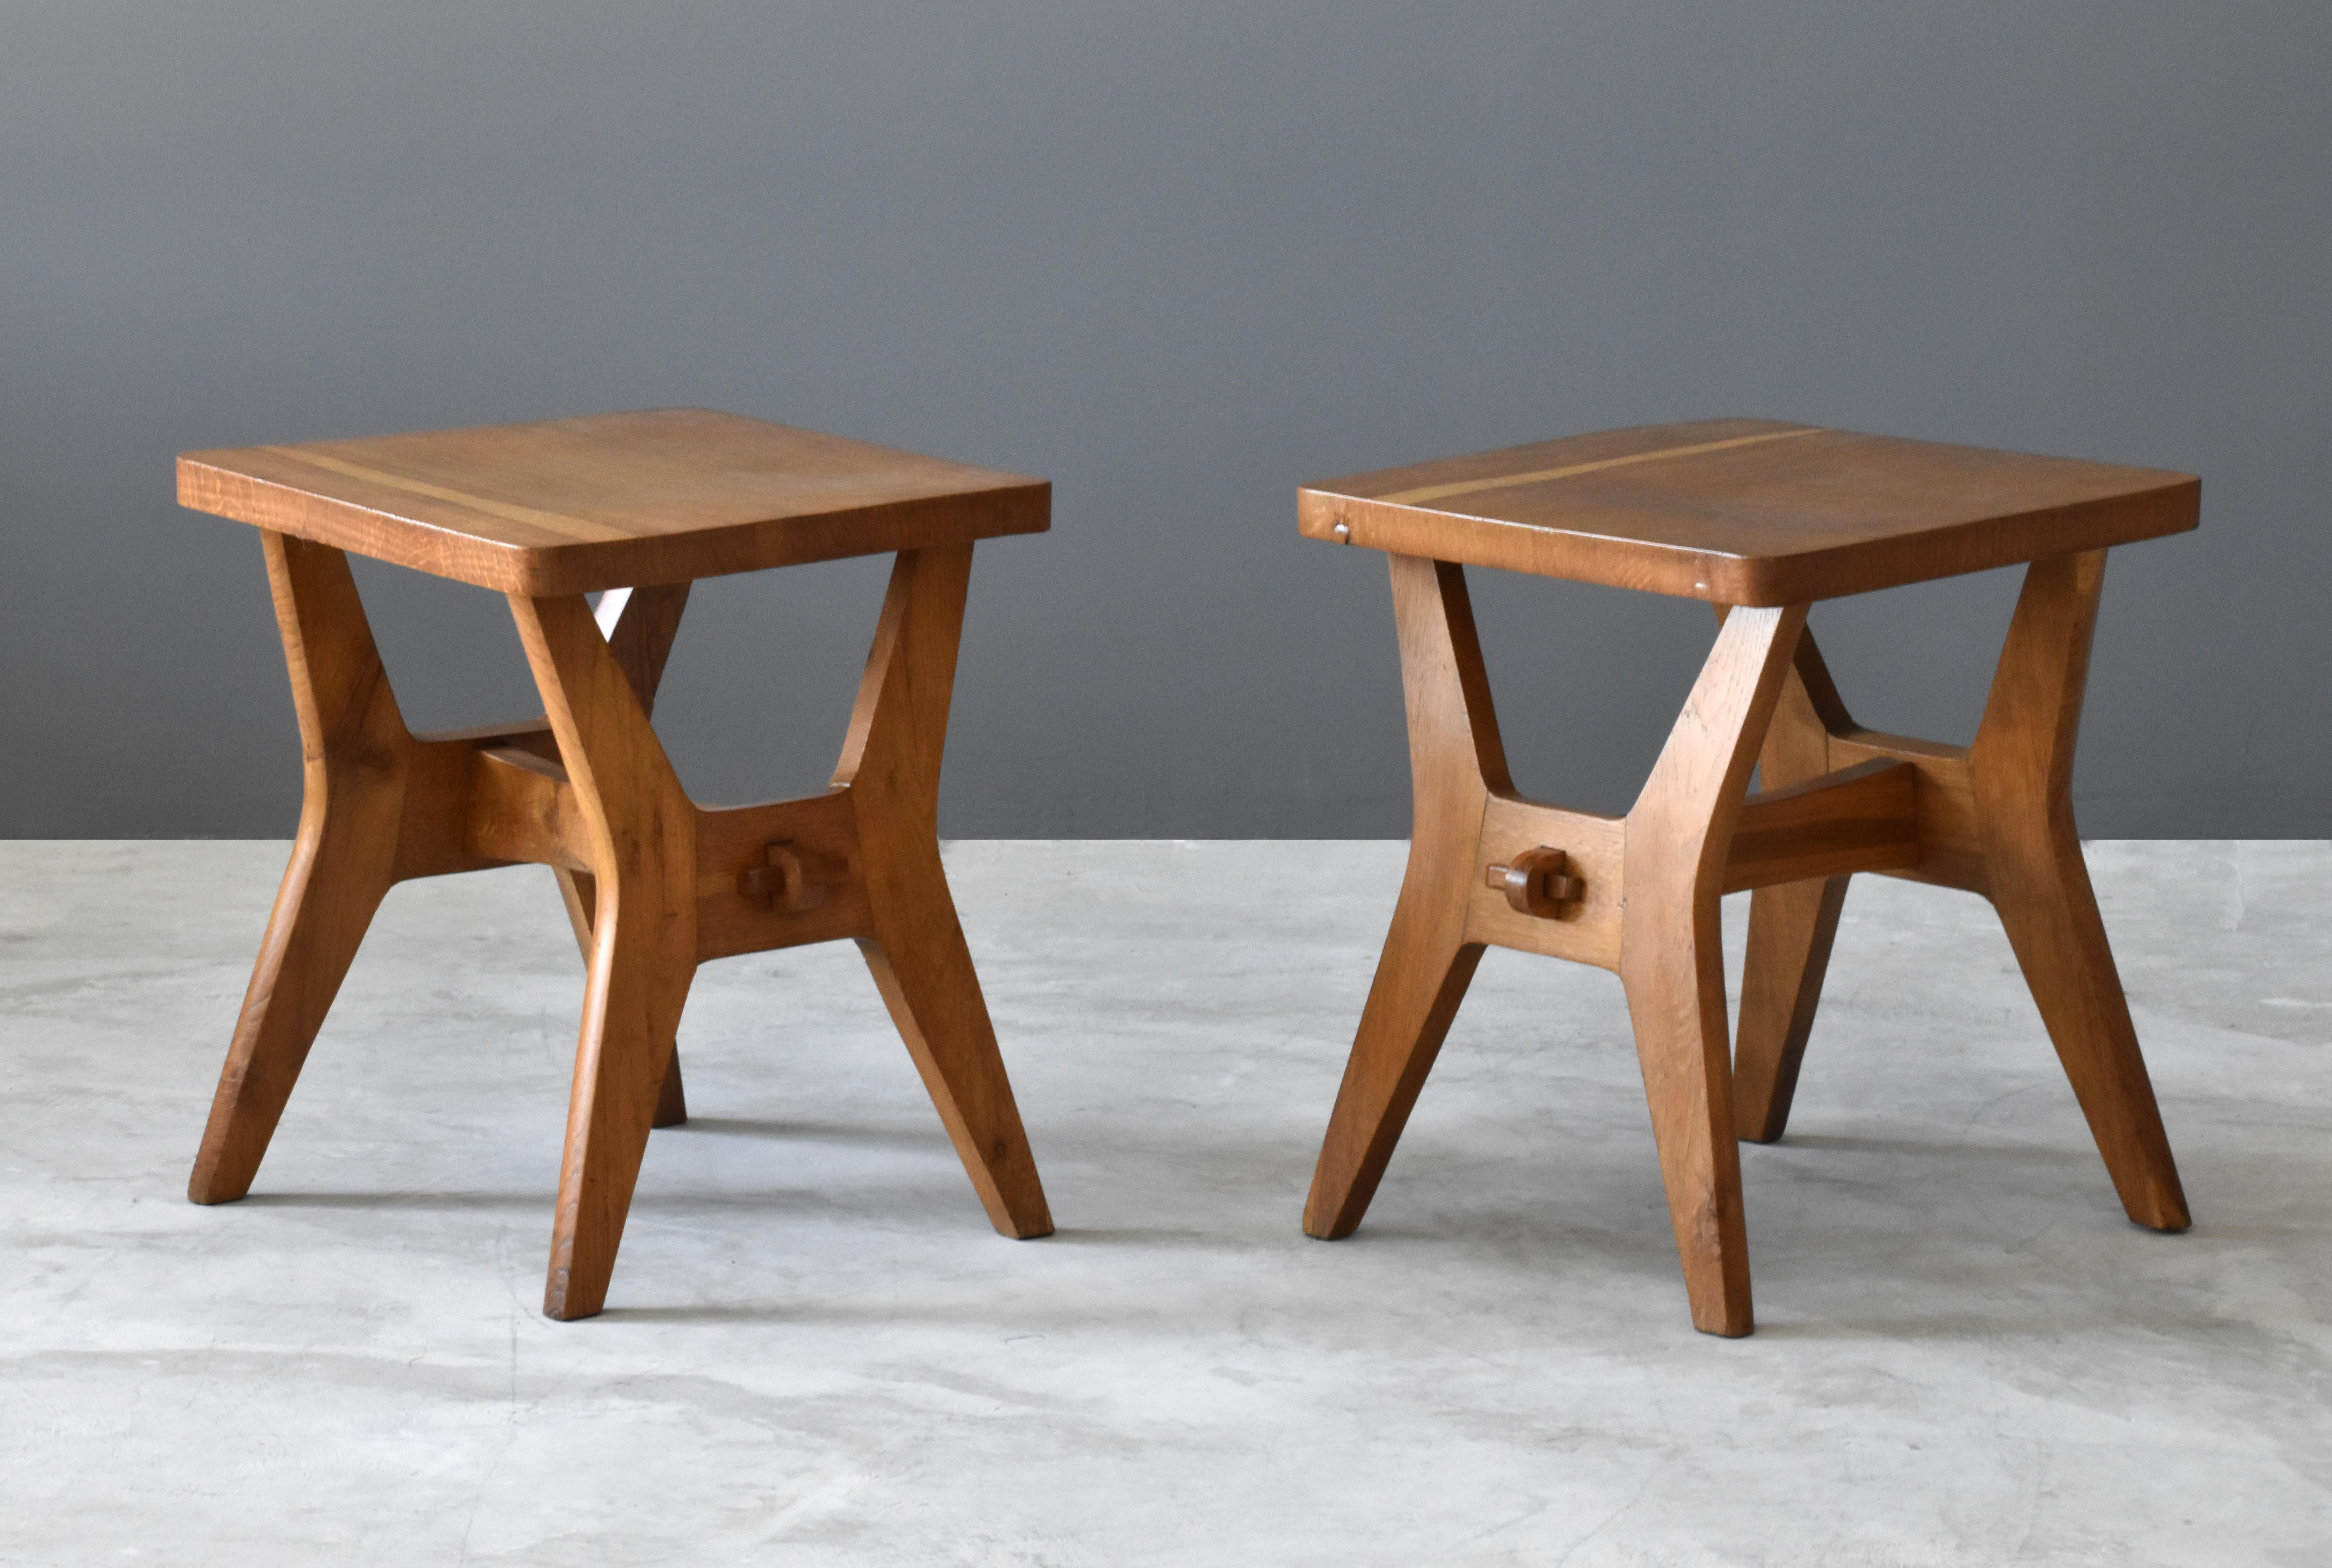 A pair of highly modern oak stools, with refined form and revealed joinery.  Designed by unknown Italian designer, most likely produced in Milan. 

